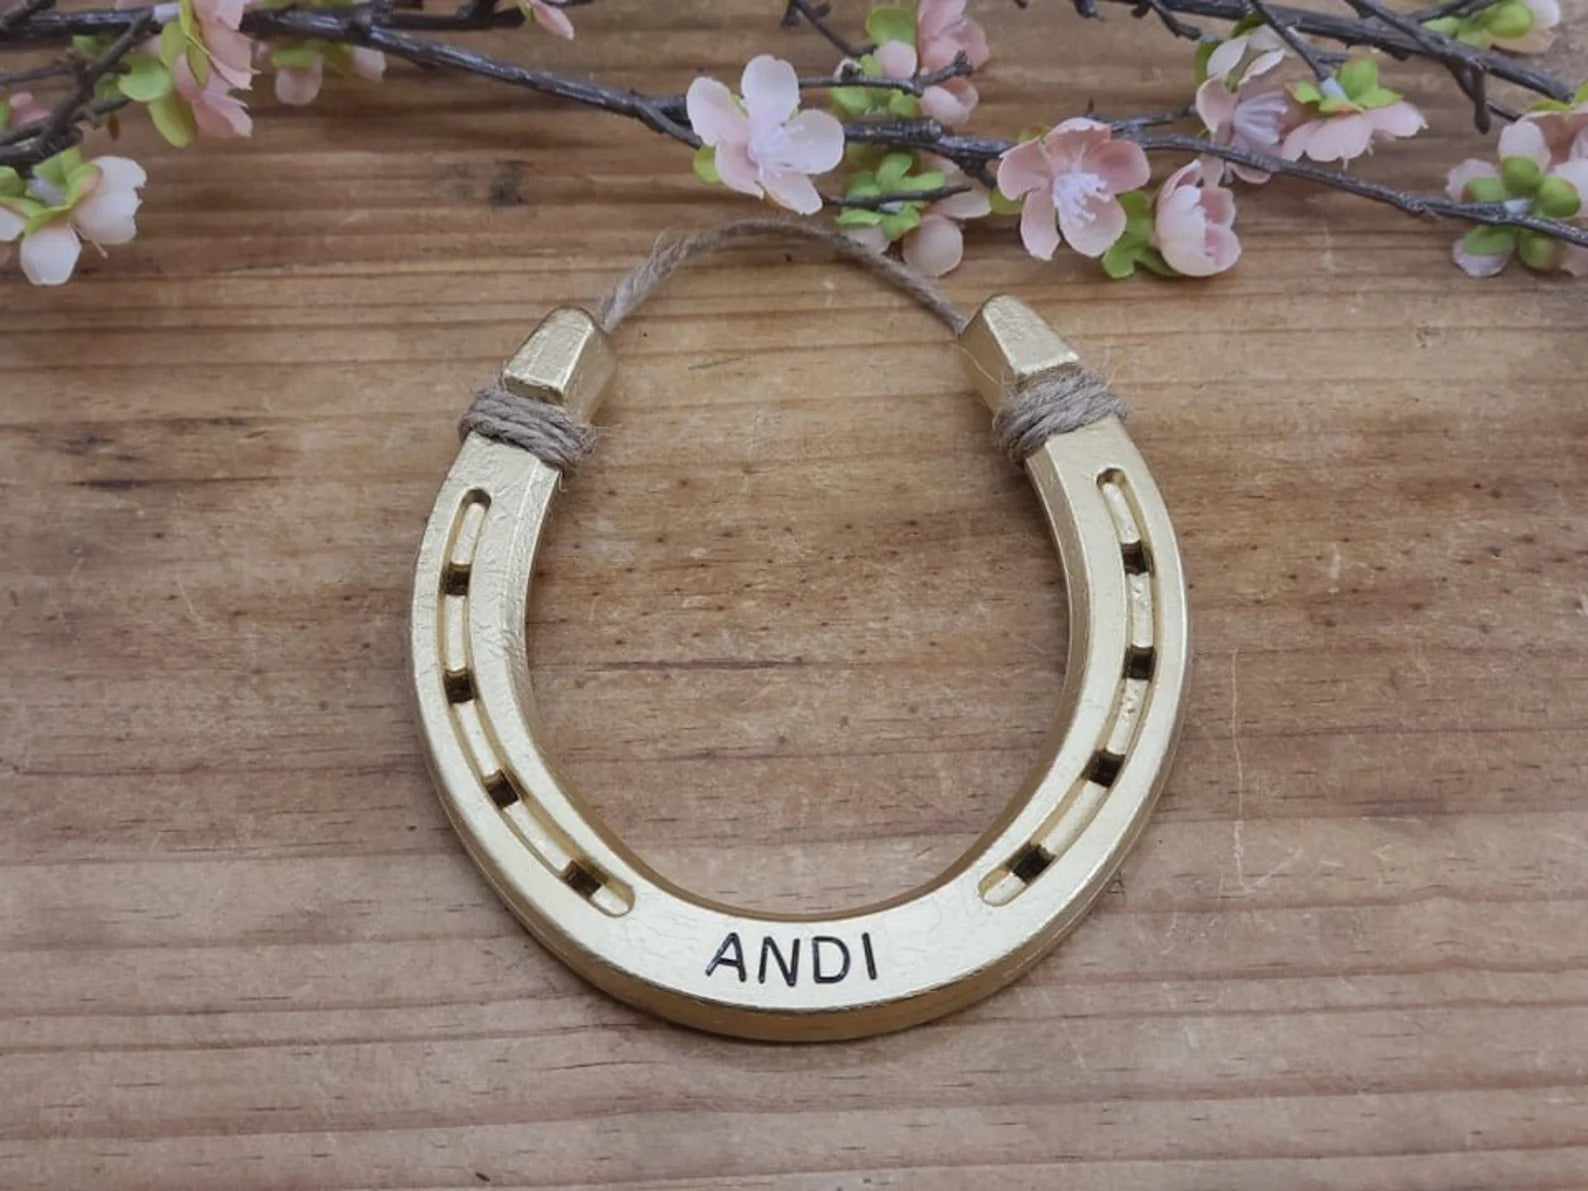  Horse Lover Gift - Rustic Hanging Horseshoe Decor : Handmade  Products